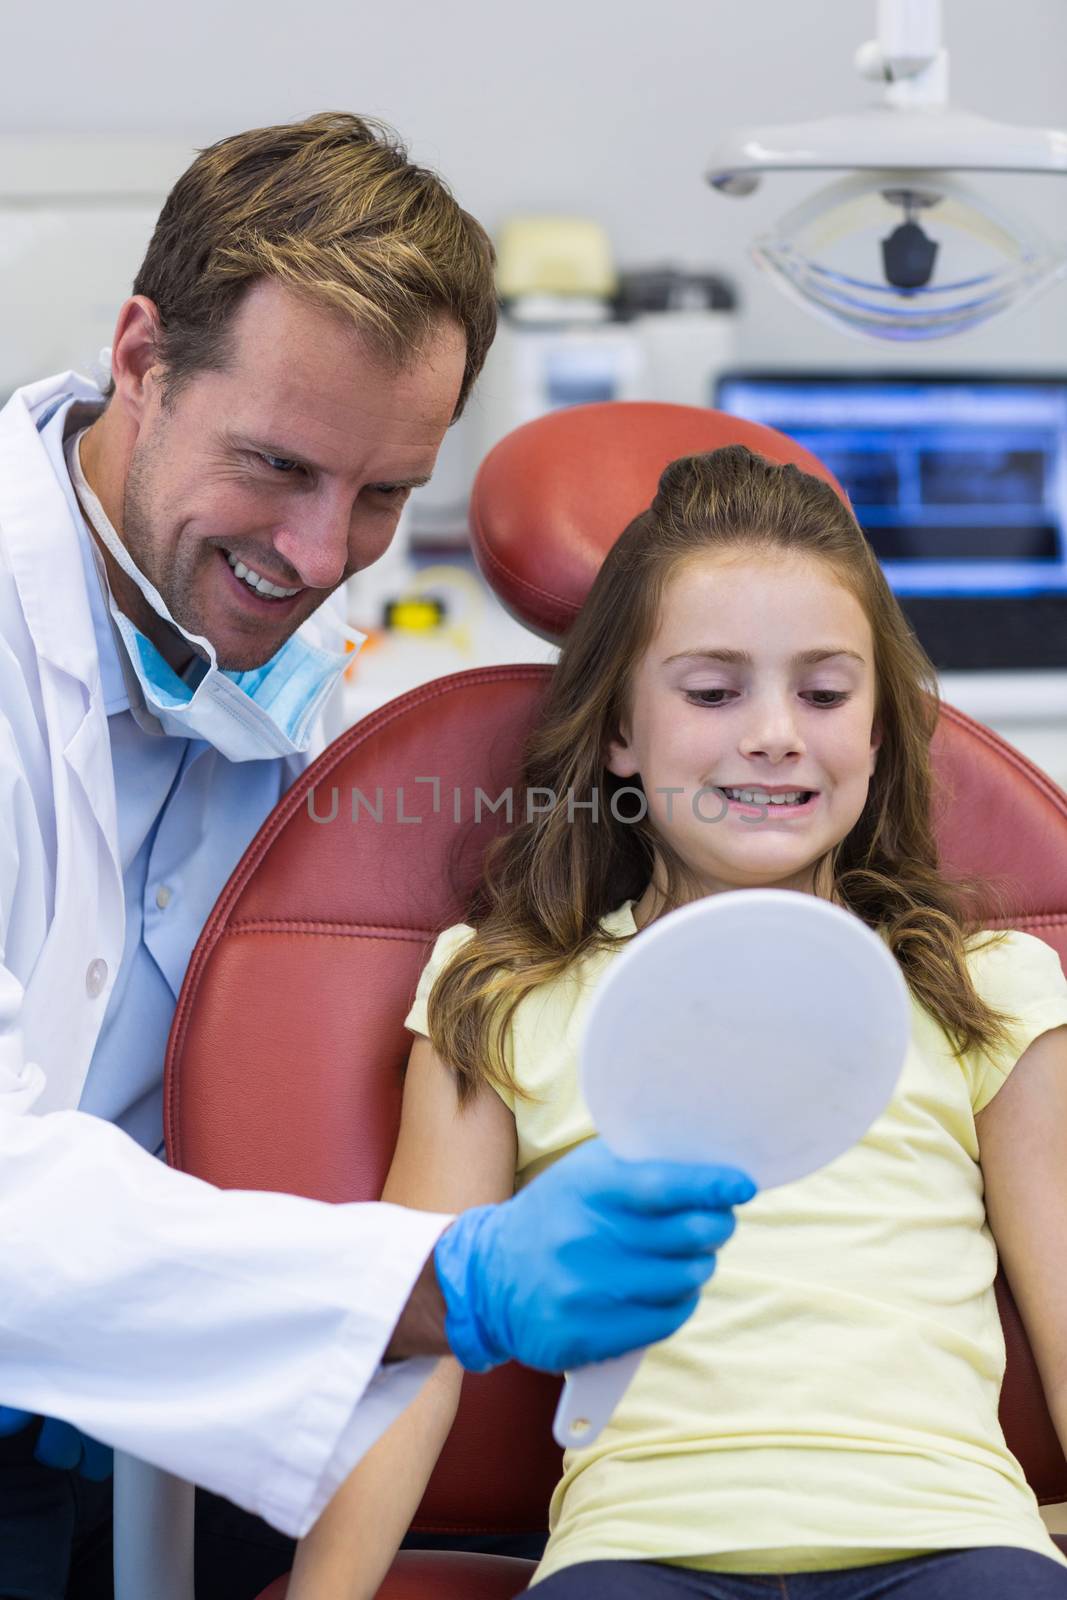 Dentist showing mirror to young patient in dental clinic by Wavebreakmedia